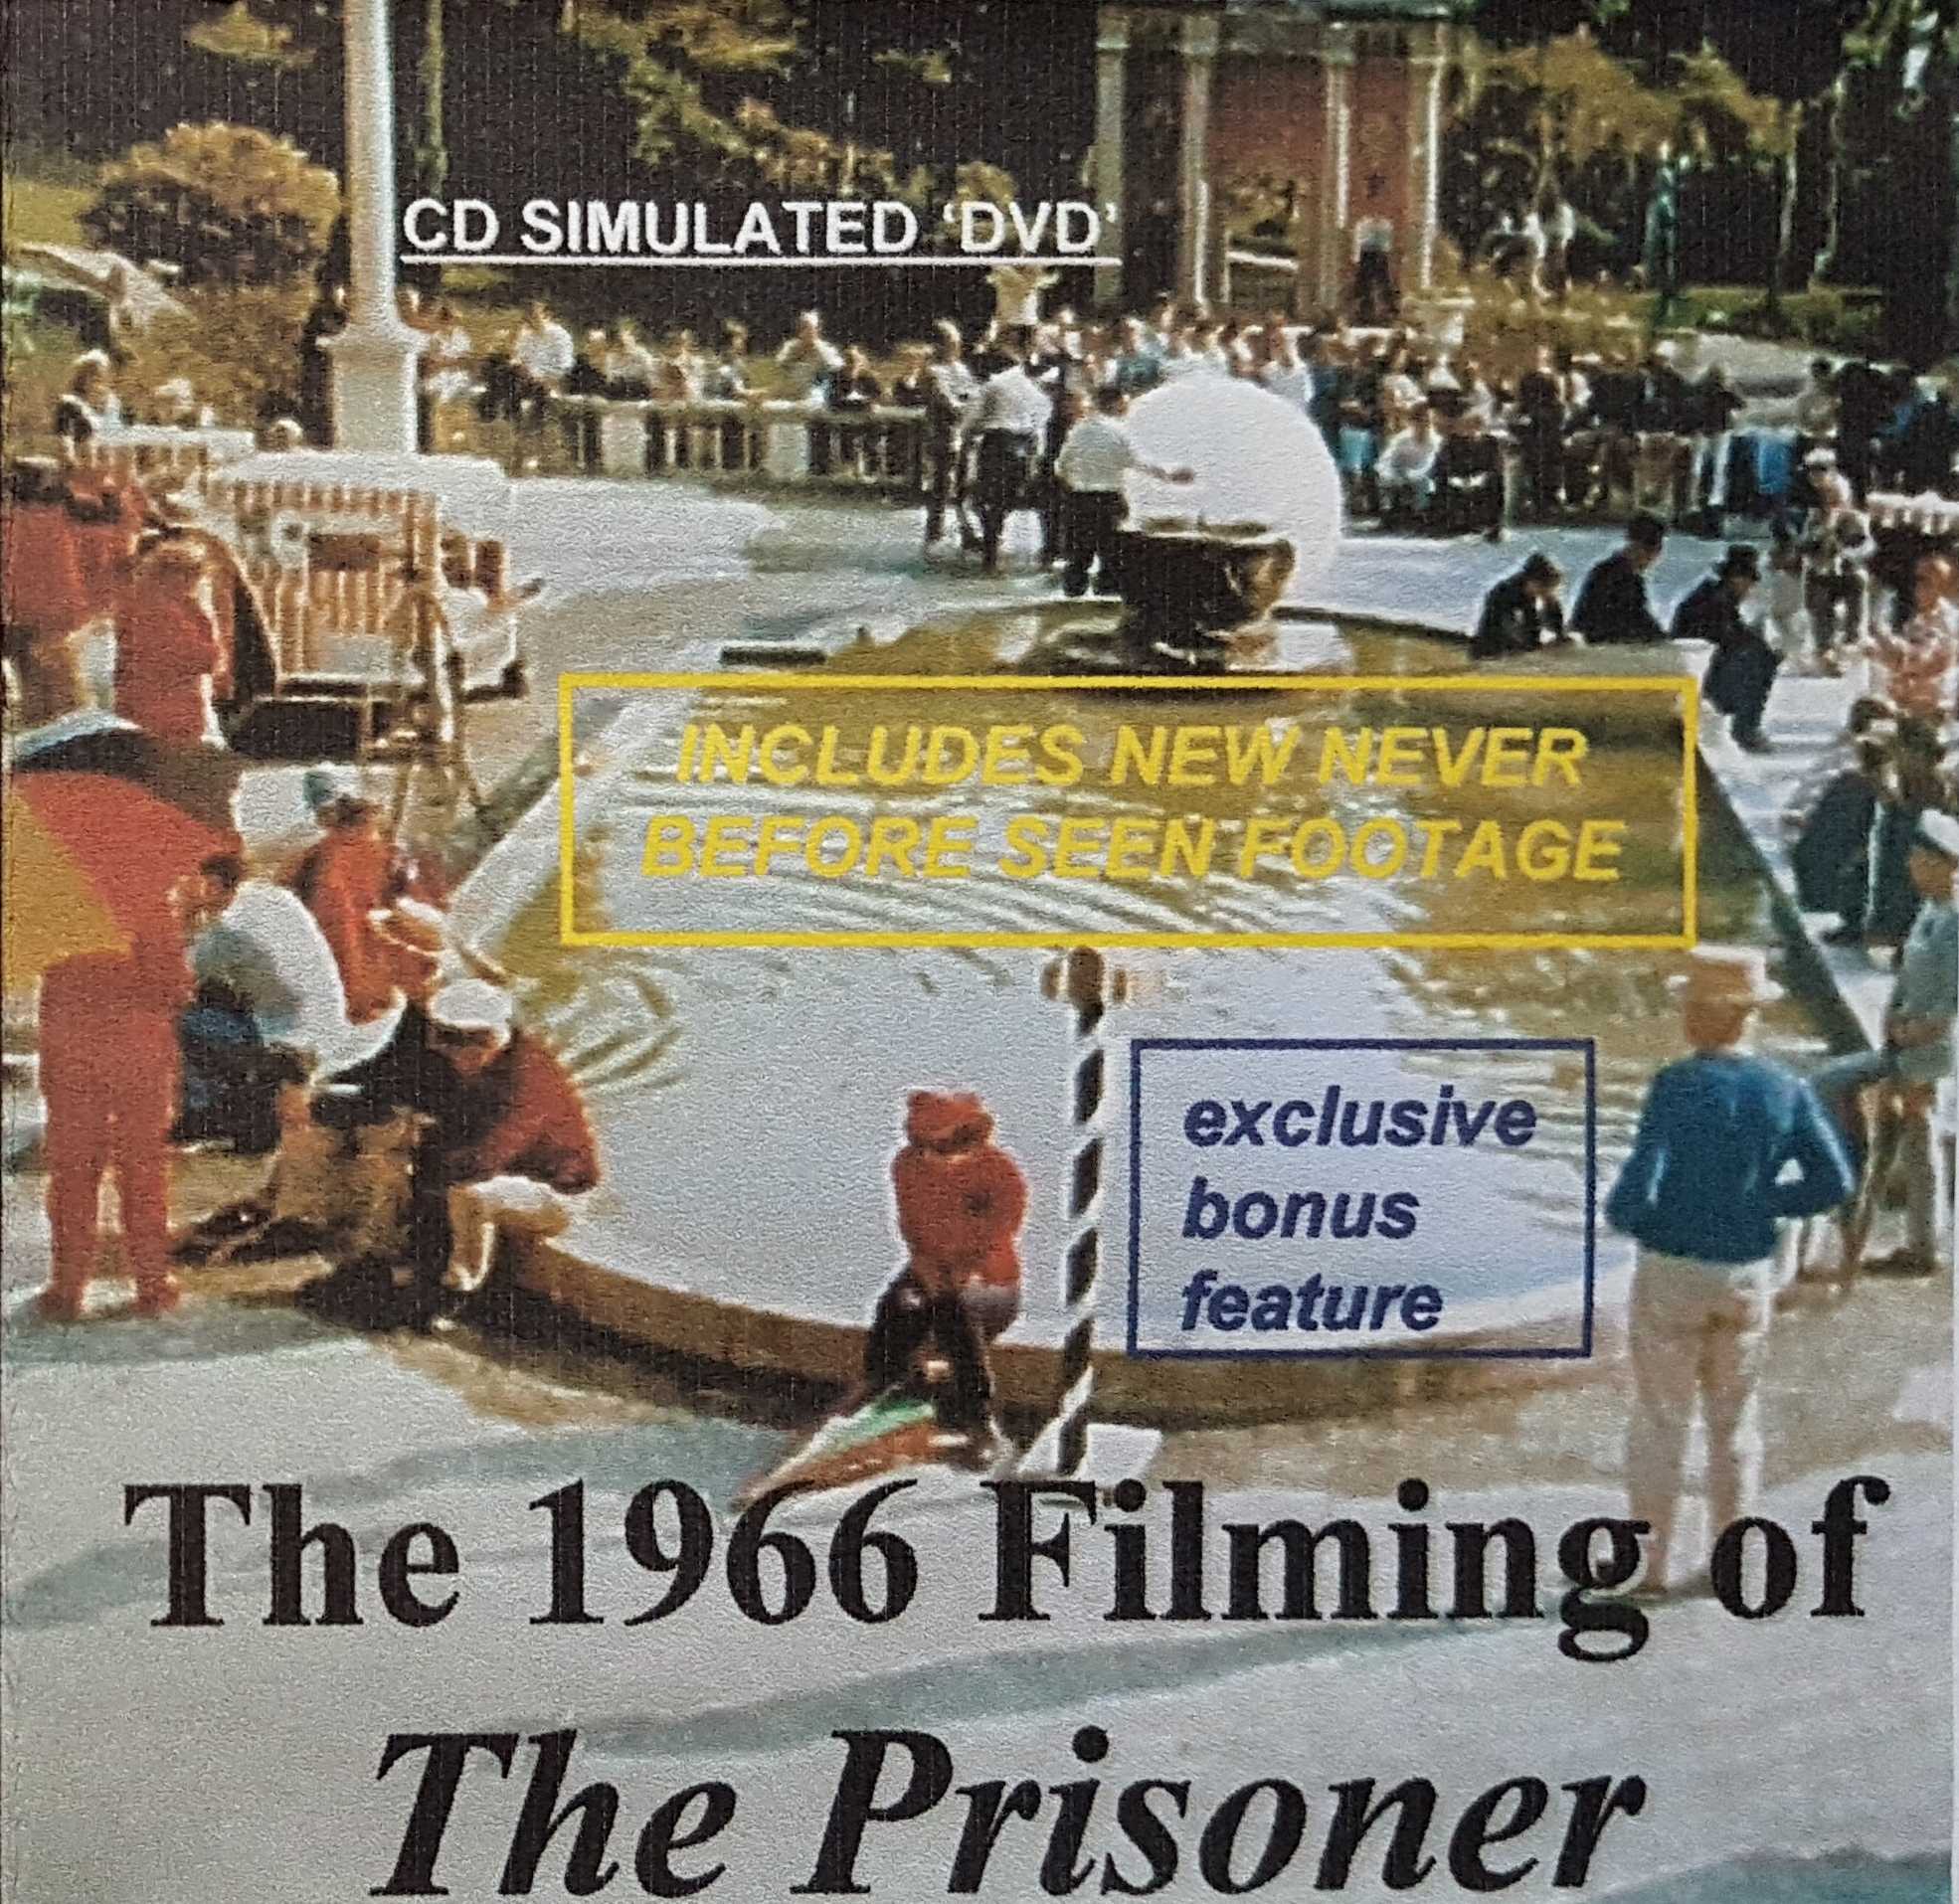 Picture of DVD-T1FOTP The 1966 filming of the Prisoner by artist Unknown from ITV, Channel 4 and Channel 5 library